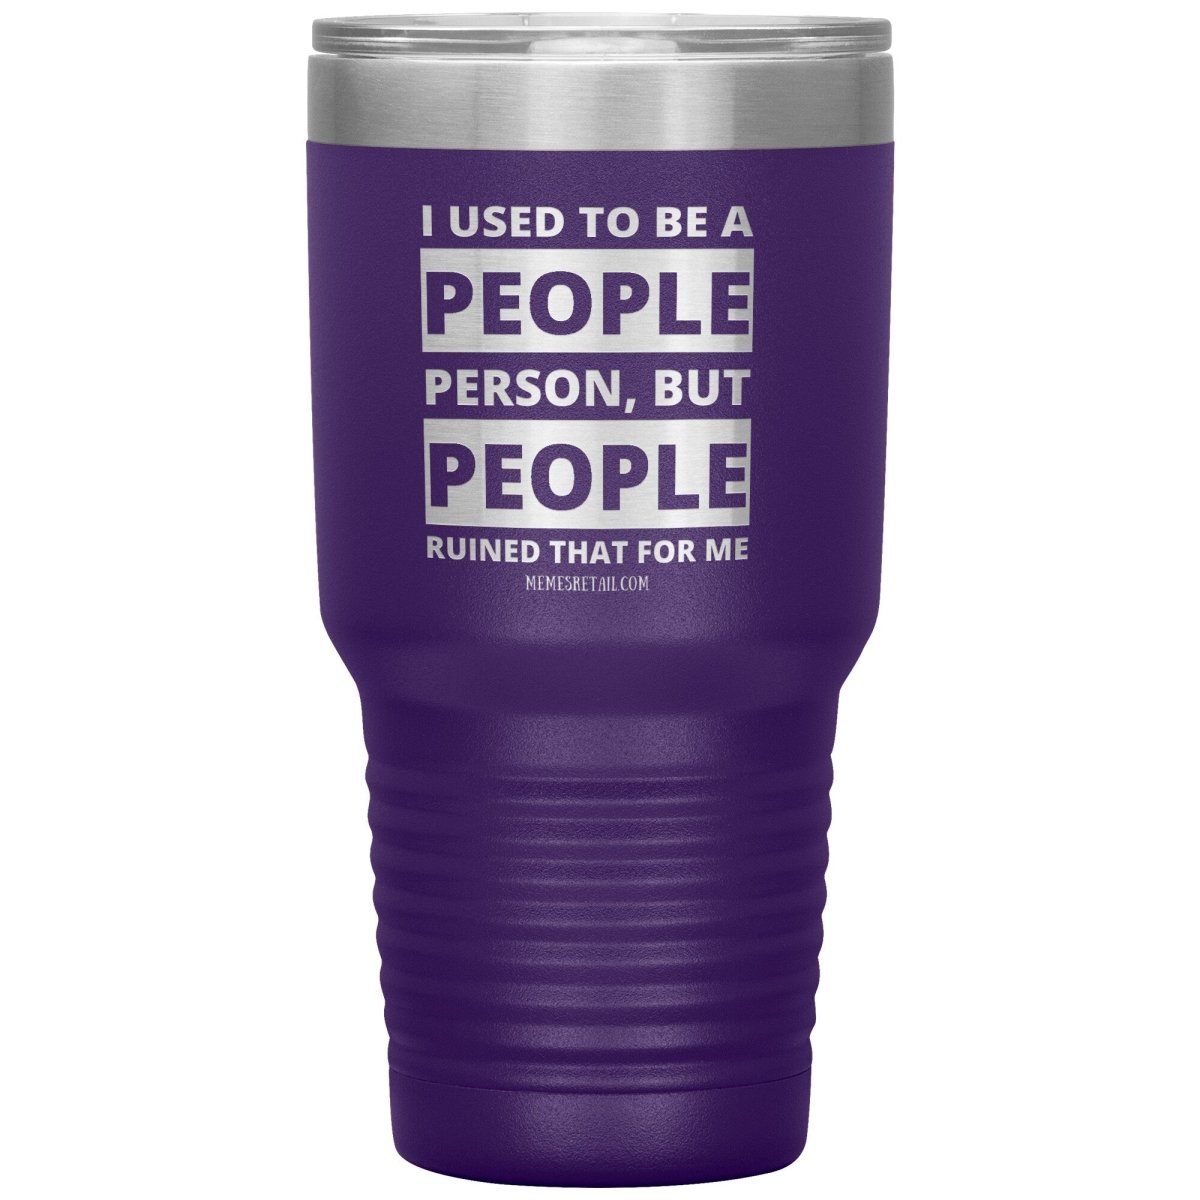 I Used To Be A People Person, But People Ruined That For Me Tumblers, 30oz Insulated Tumbler / Purple - MemesRetail.com